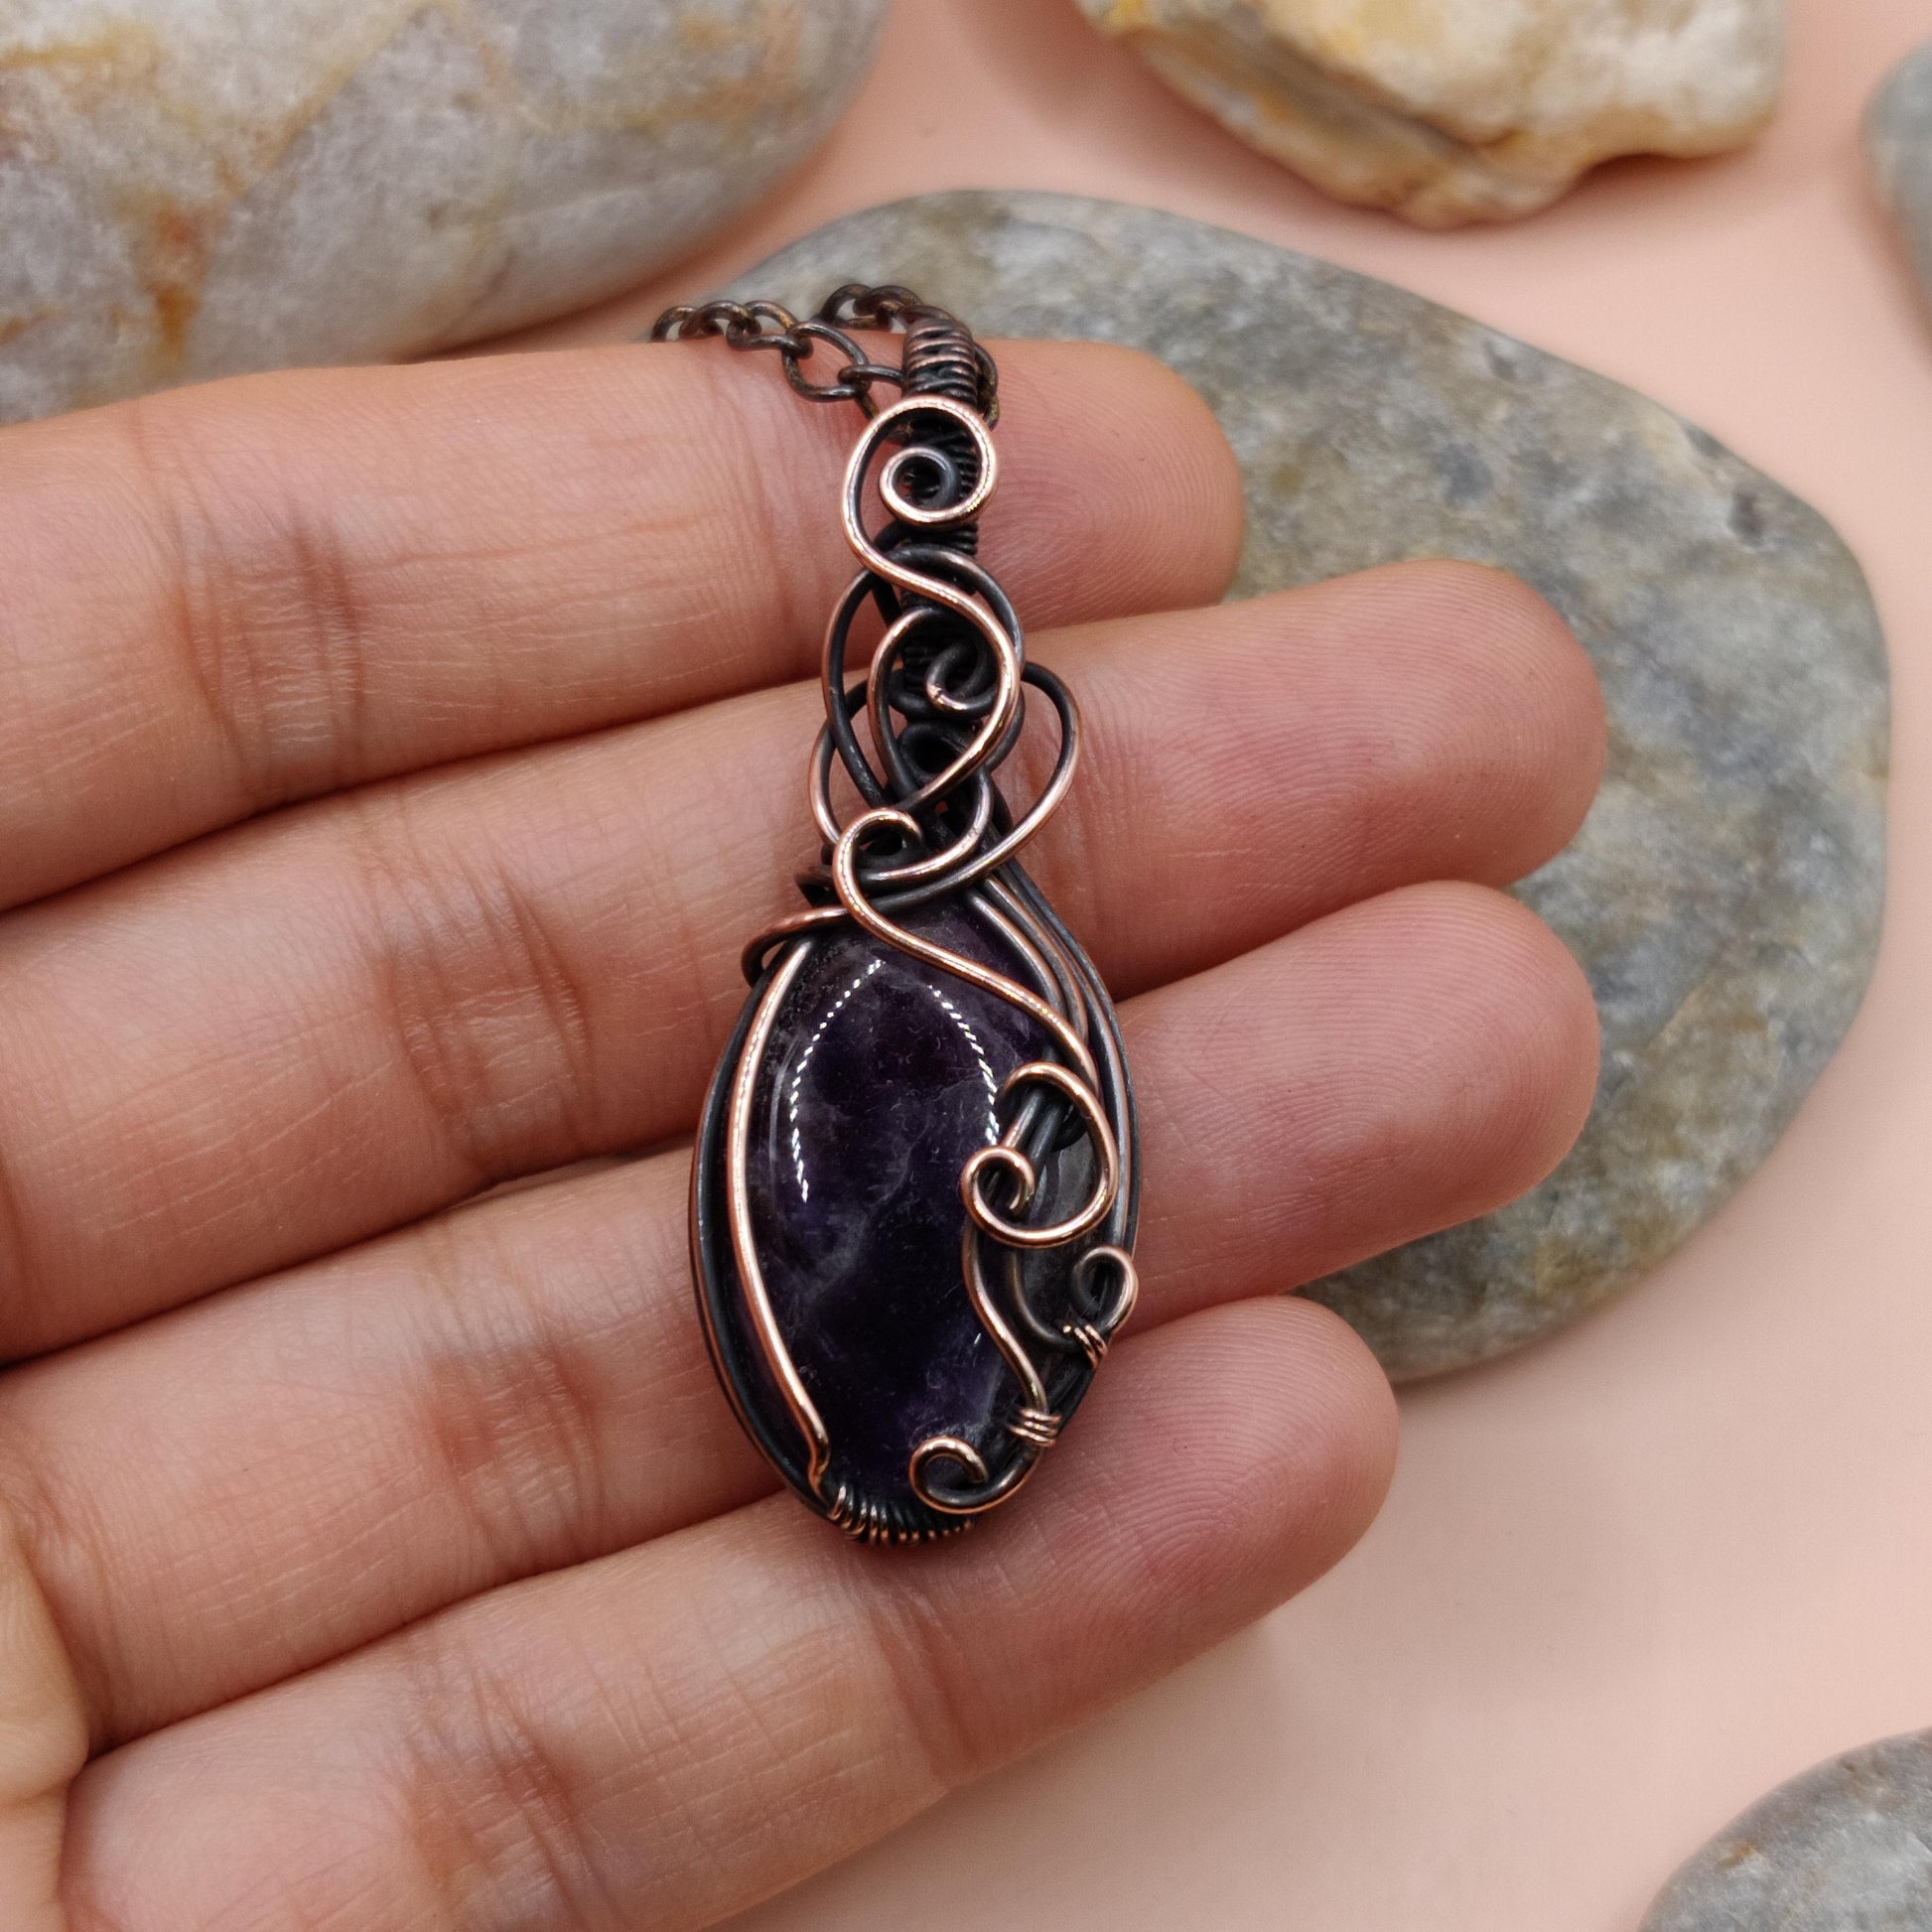 Carina - Amethyst Necklace By Sanguine Aura Handcrafted Jewellery. Healing Benefits Of Amethyst -  eases stress, promotes sleep, and brings clarity.